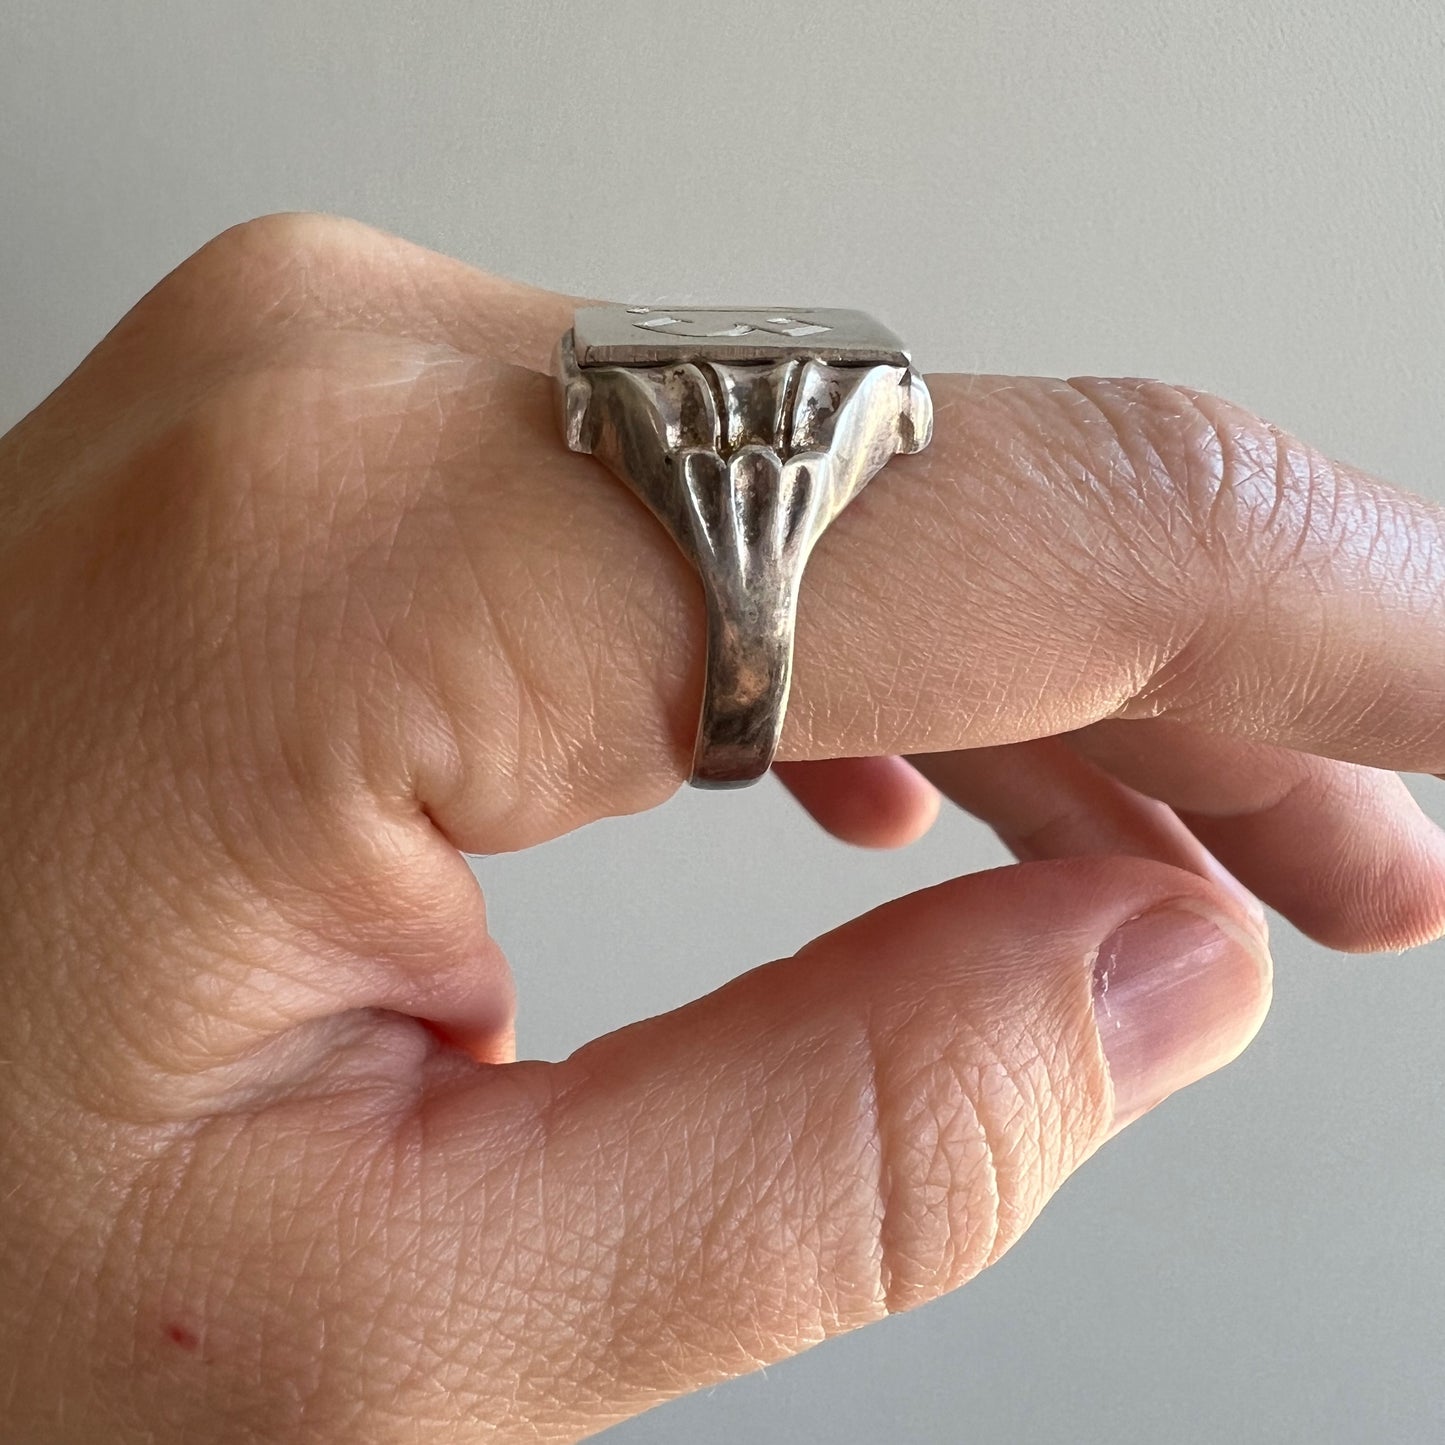 reimagined V I N T A G E // lucky 13 / 800 silver signet ring with new engraving / size 8.5-ish